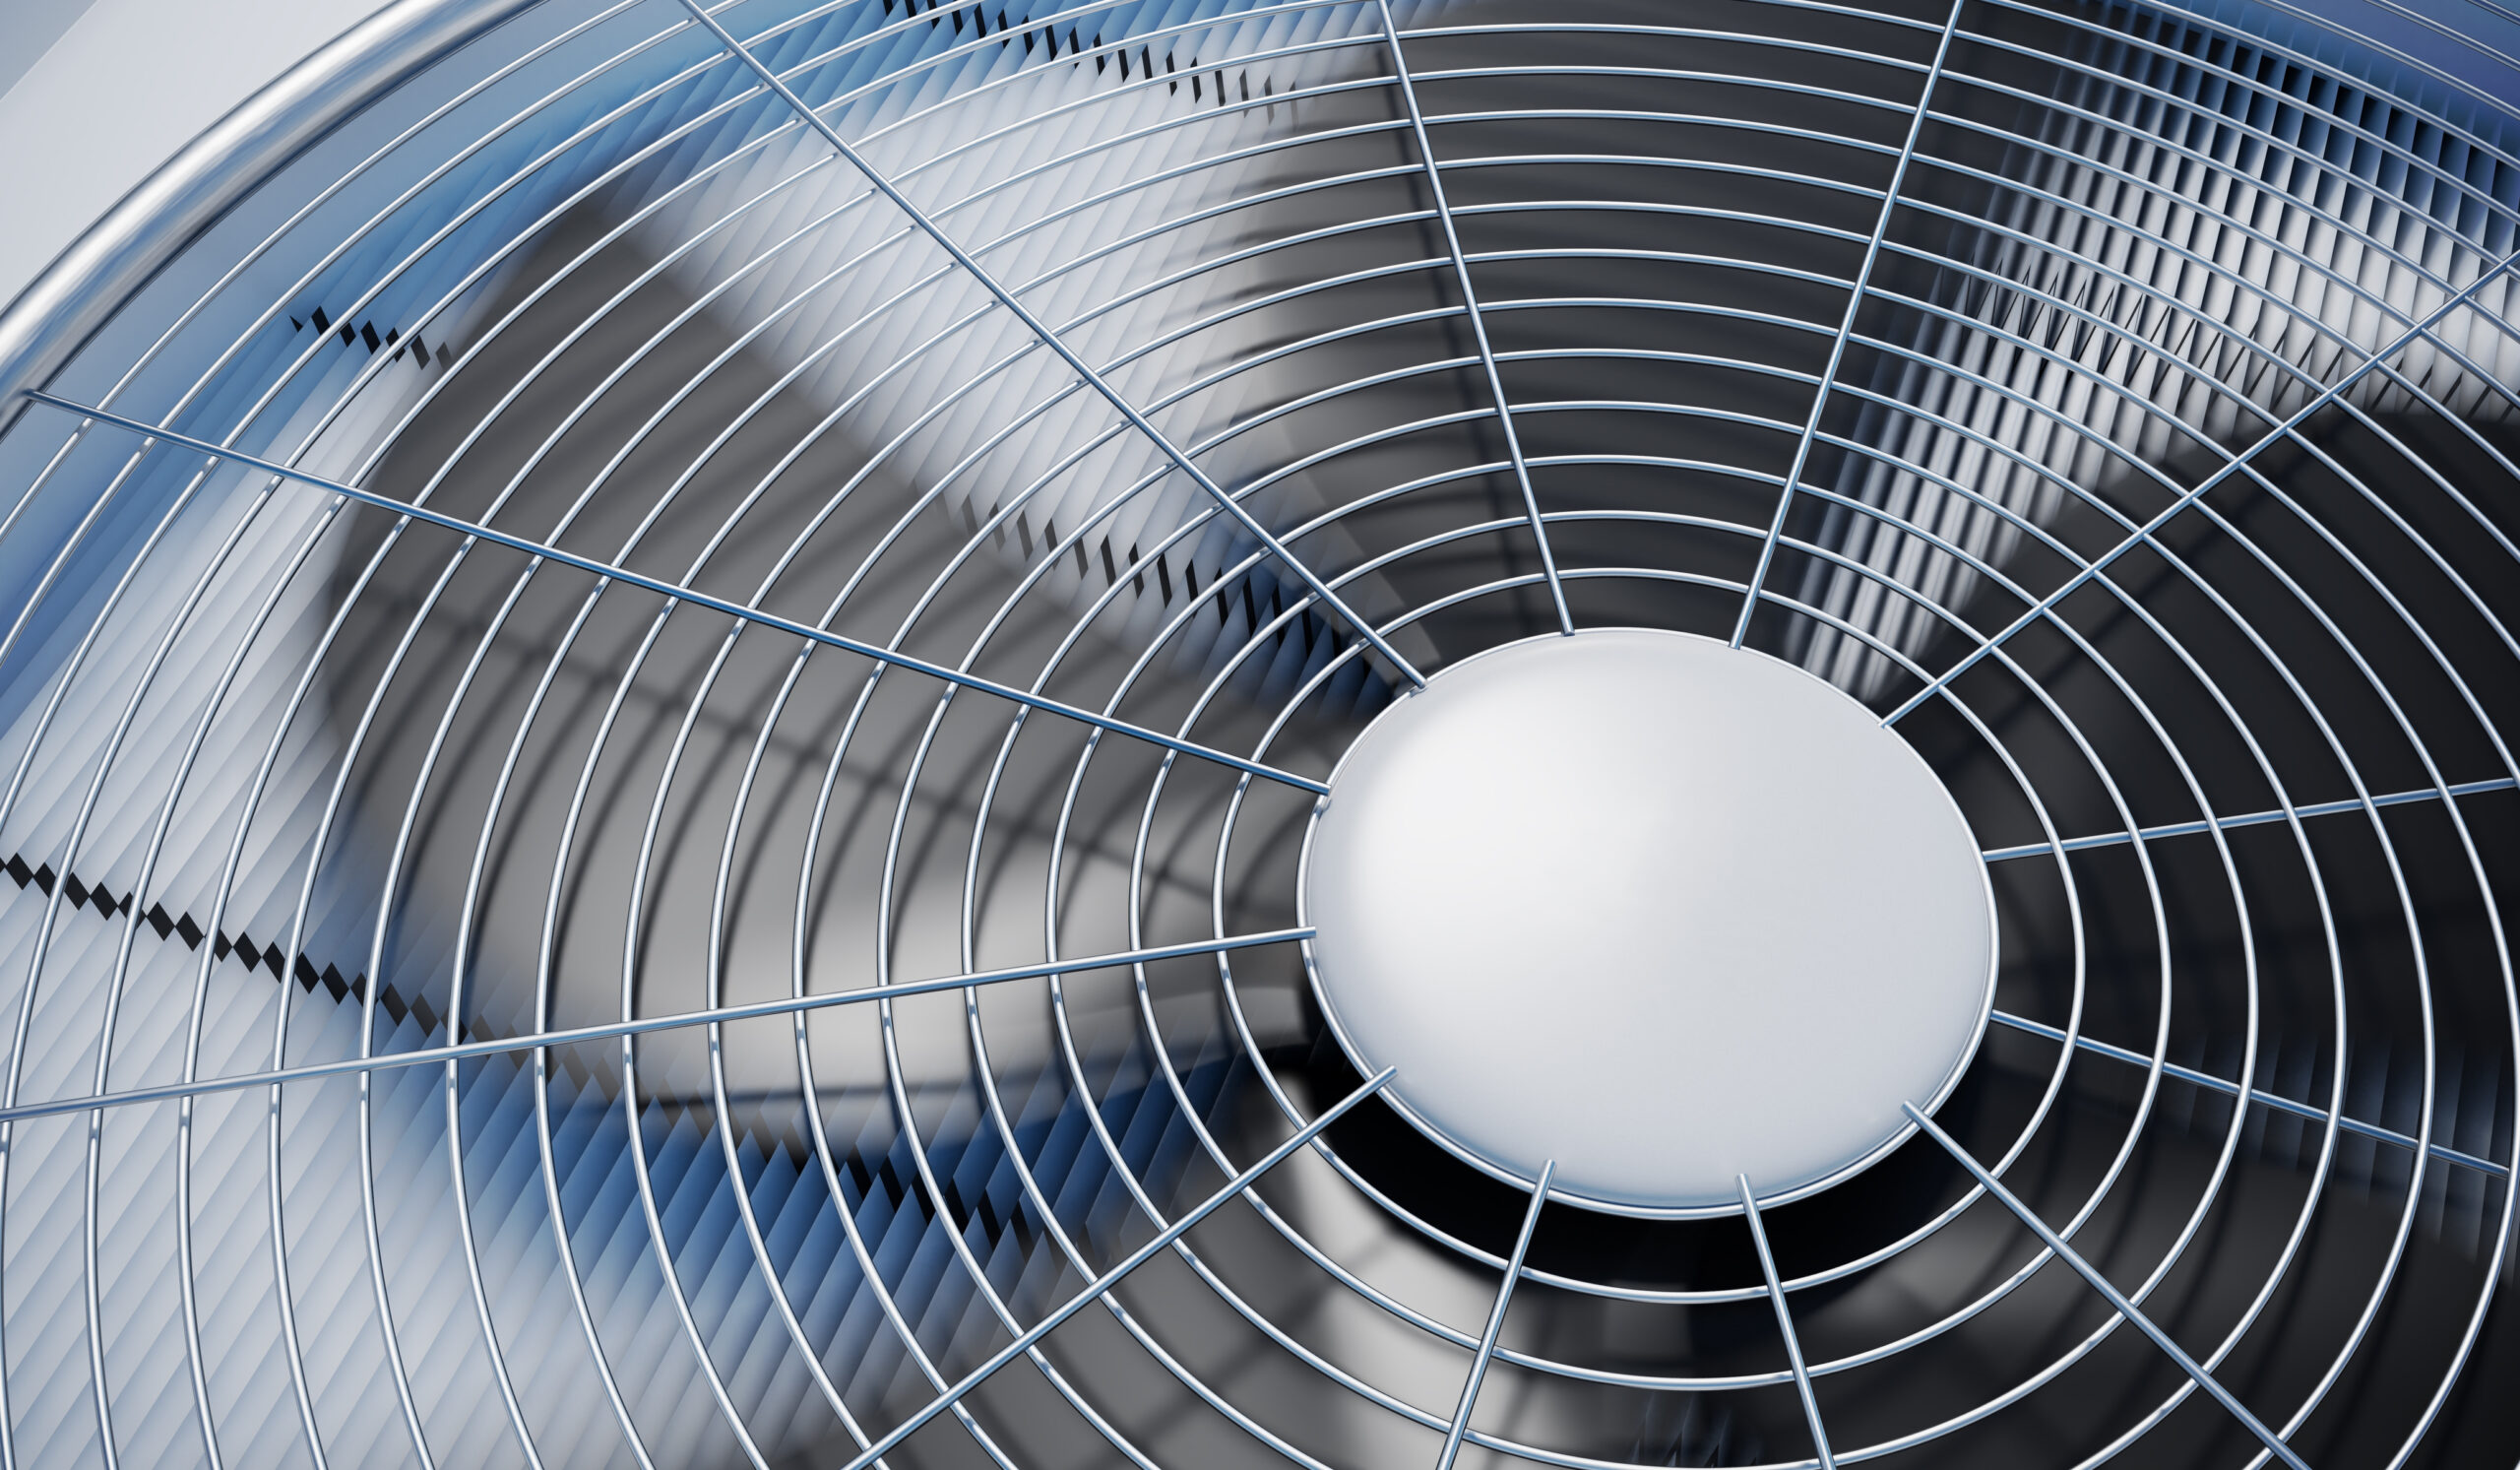 Up-close picture of air conditioner condenser unit fan